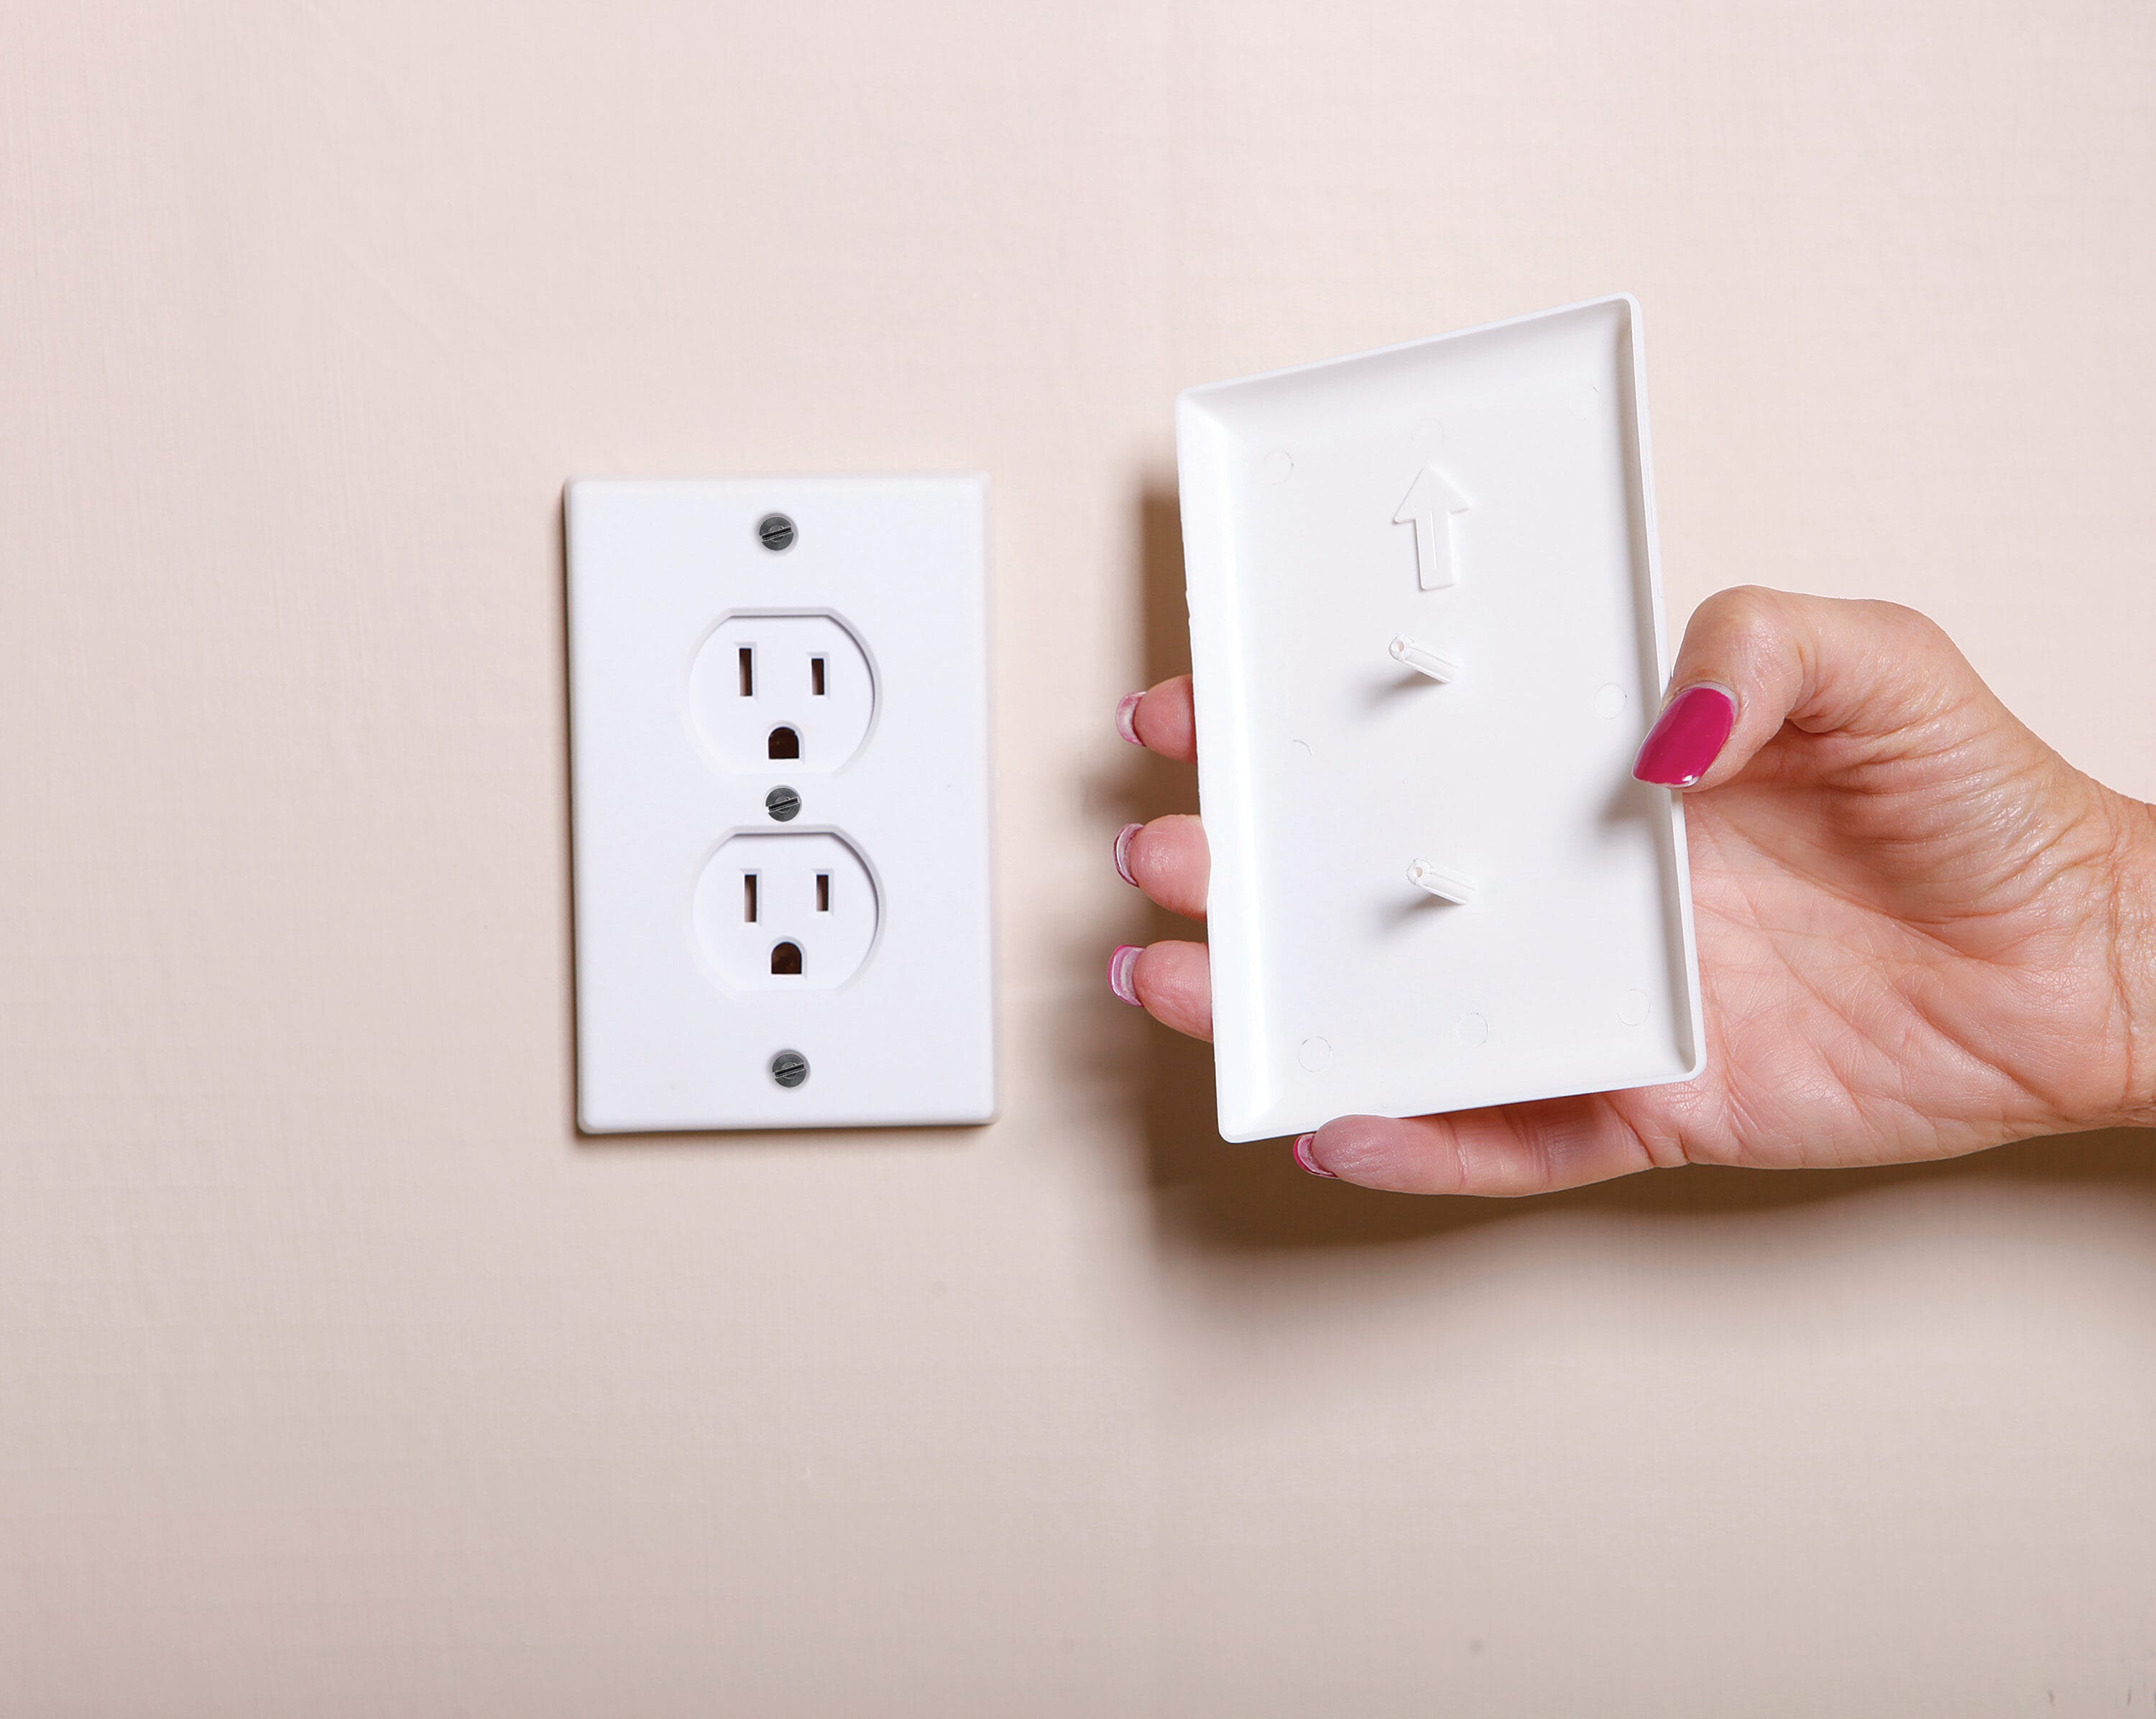 Child Be Safe Modern Rectangular Style Electrical Switch/Outlet Cover, Childproof Outlet Covers